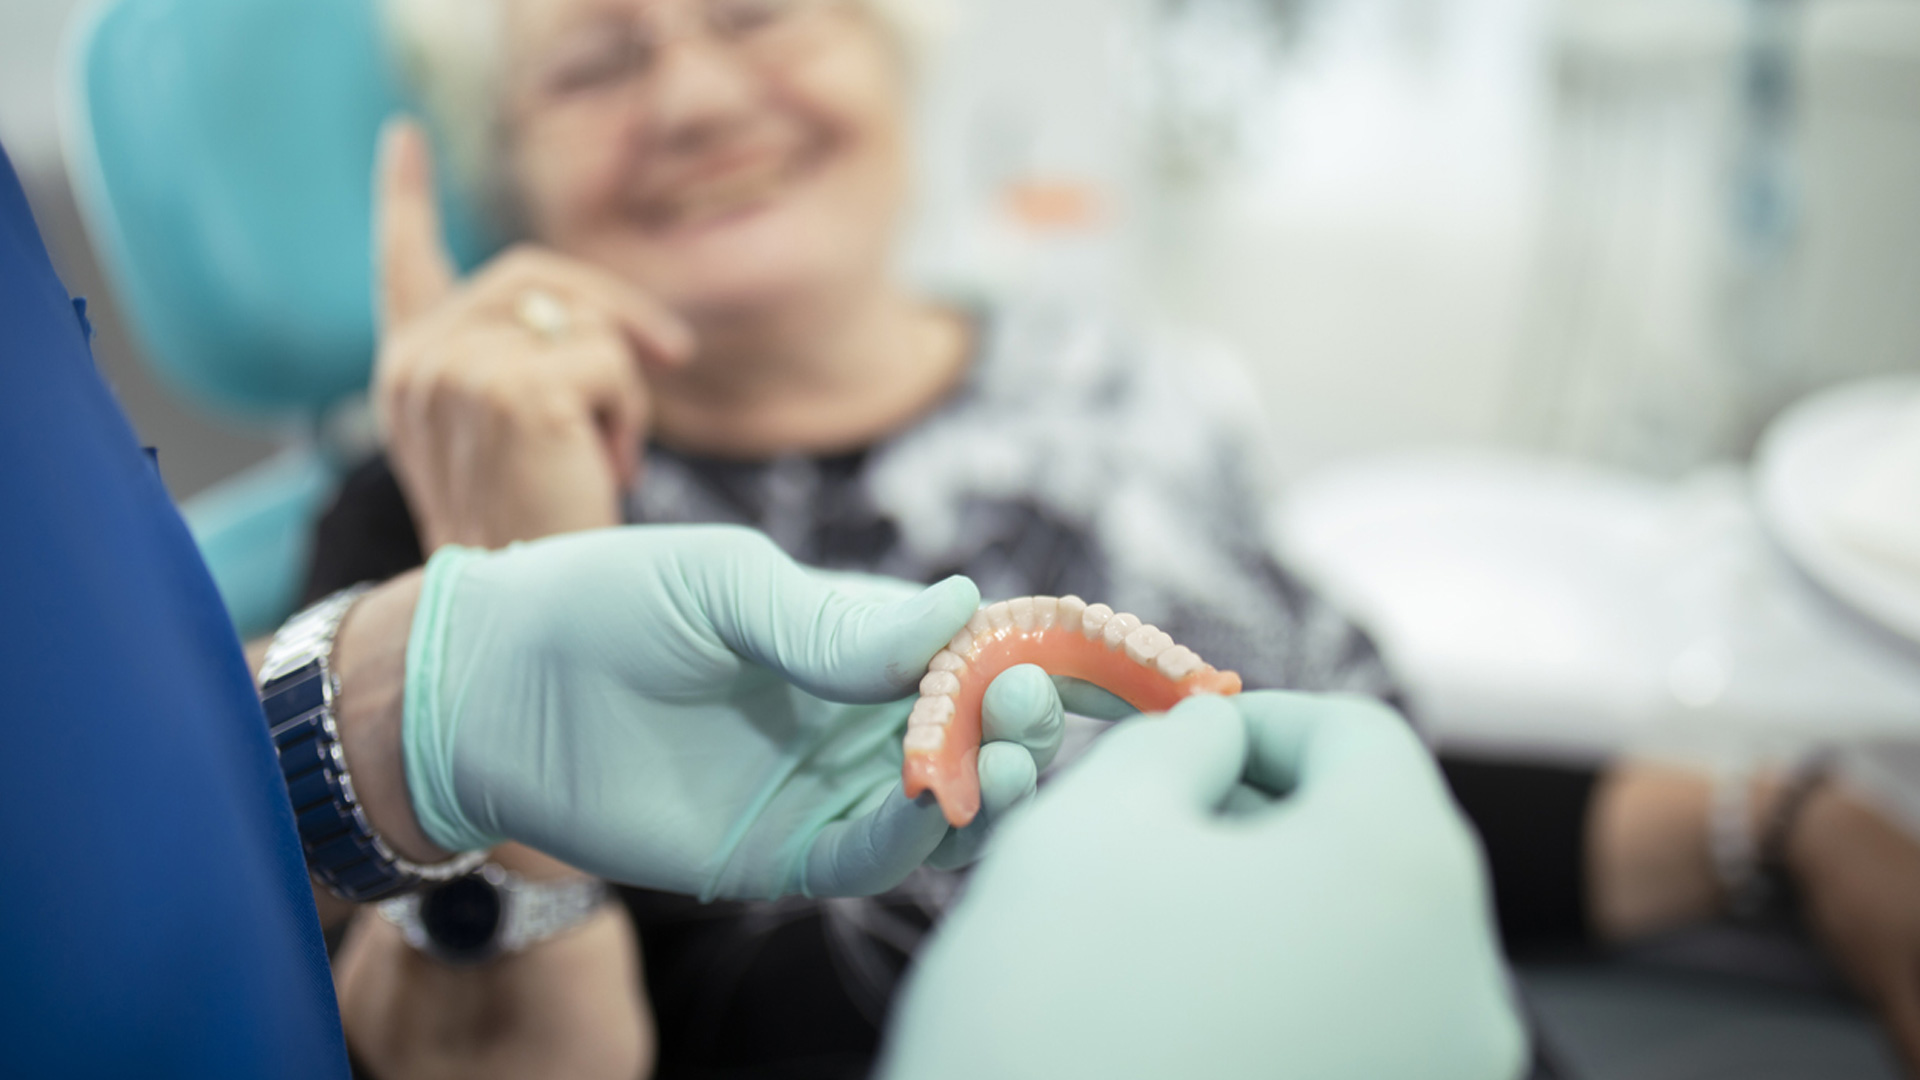 Implant-Supported Dentures